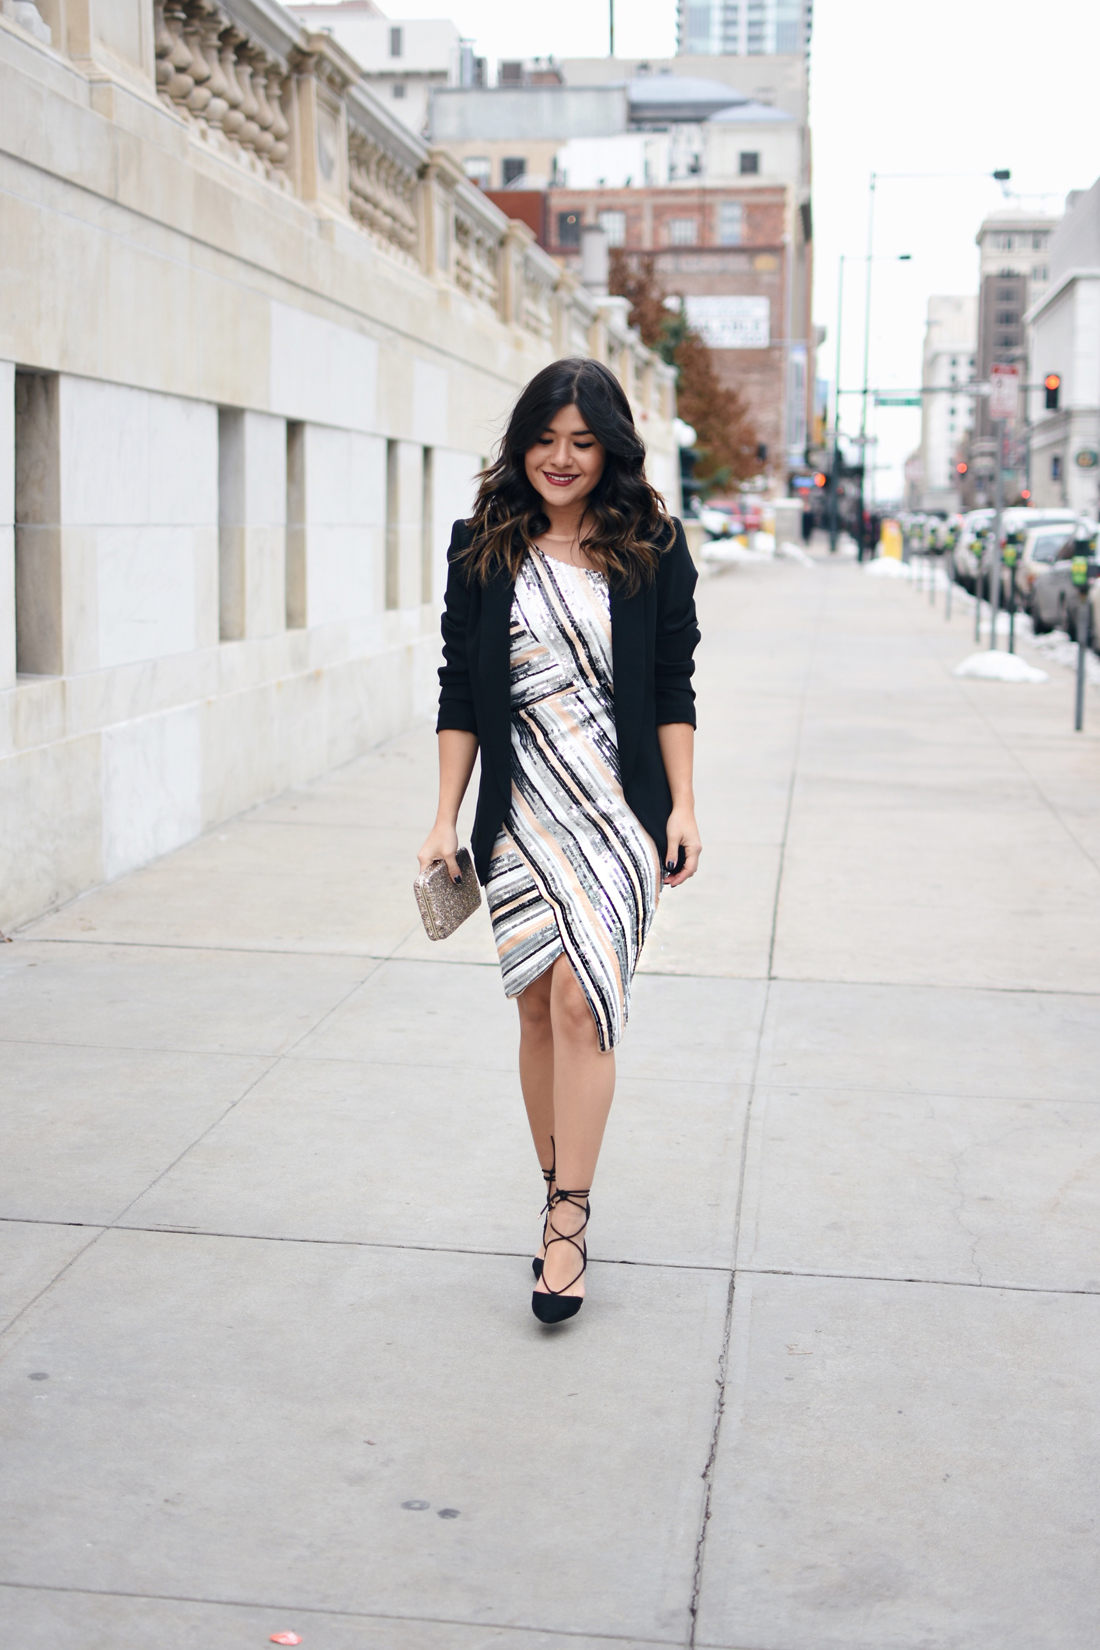 A NEW YEAR'S EVE LOOK | CHIC TALK | CHIC TALK